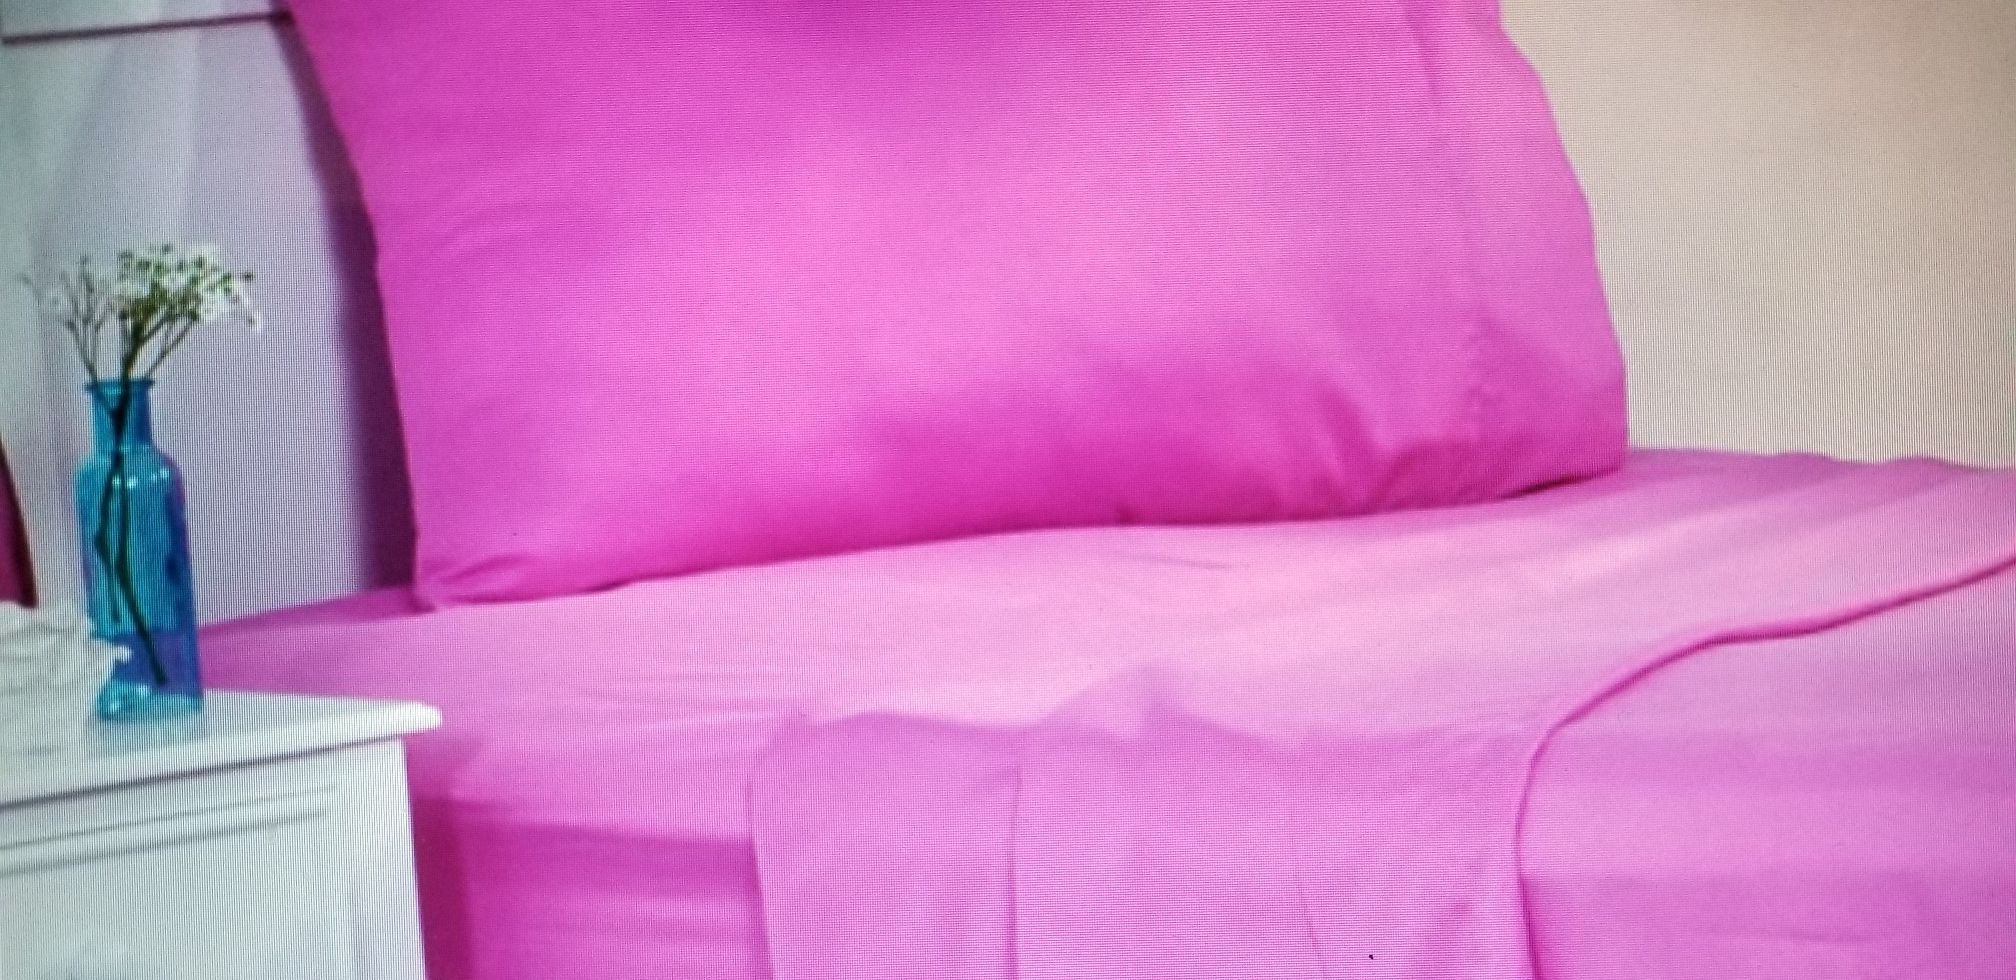 TWIN - MICROFIBER SHEET SET, SOFT BEDDING SHEETS IN PINK. COMES WITH TOP/BOTTOM SHEET AND PILLOW CASE (FIRM on the $10)